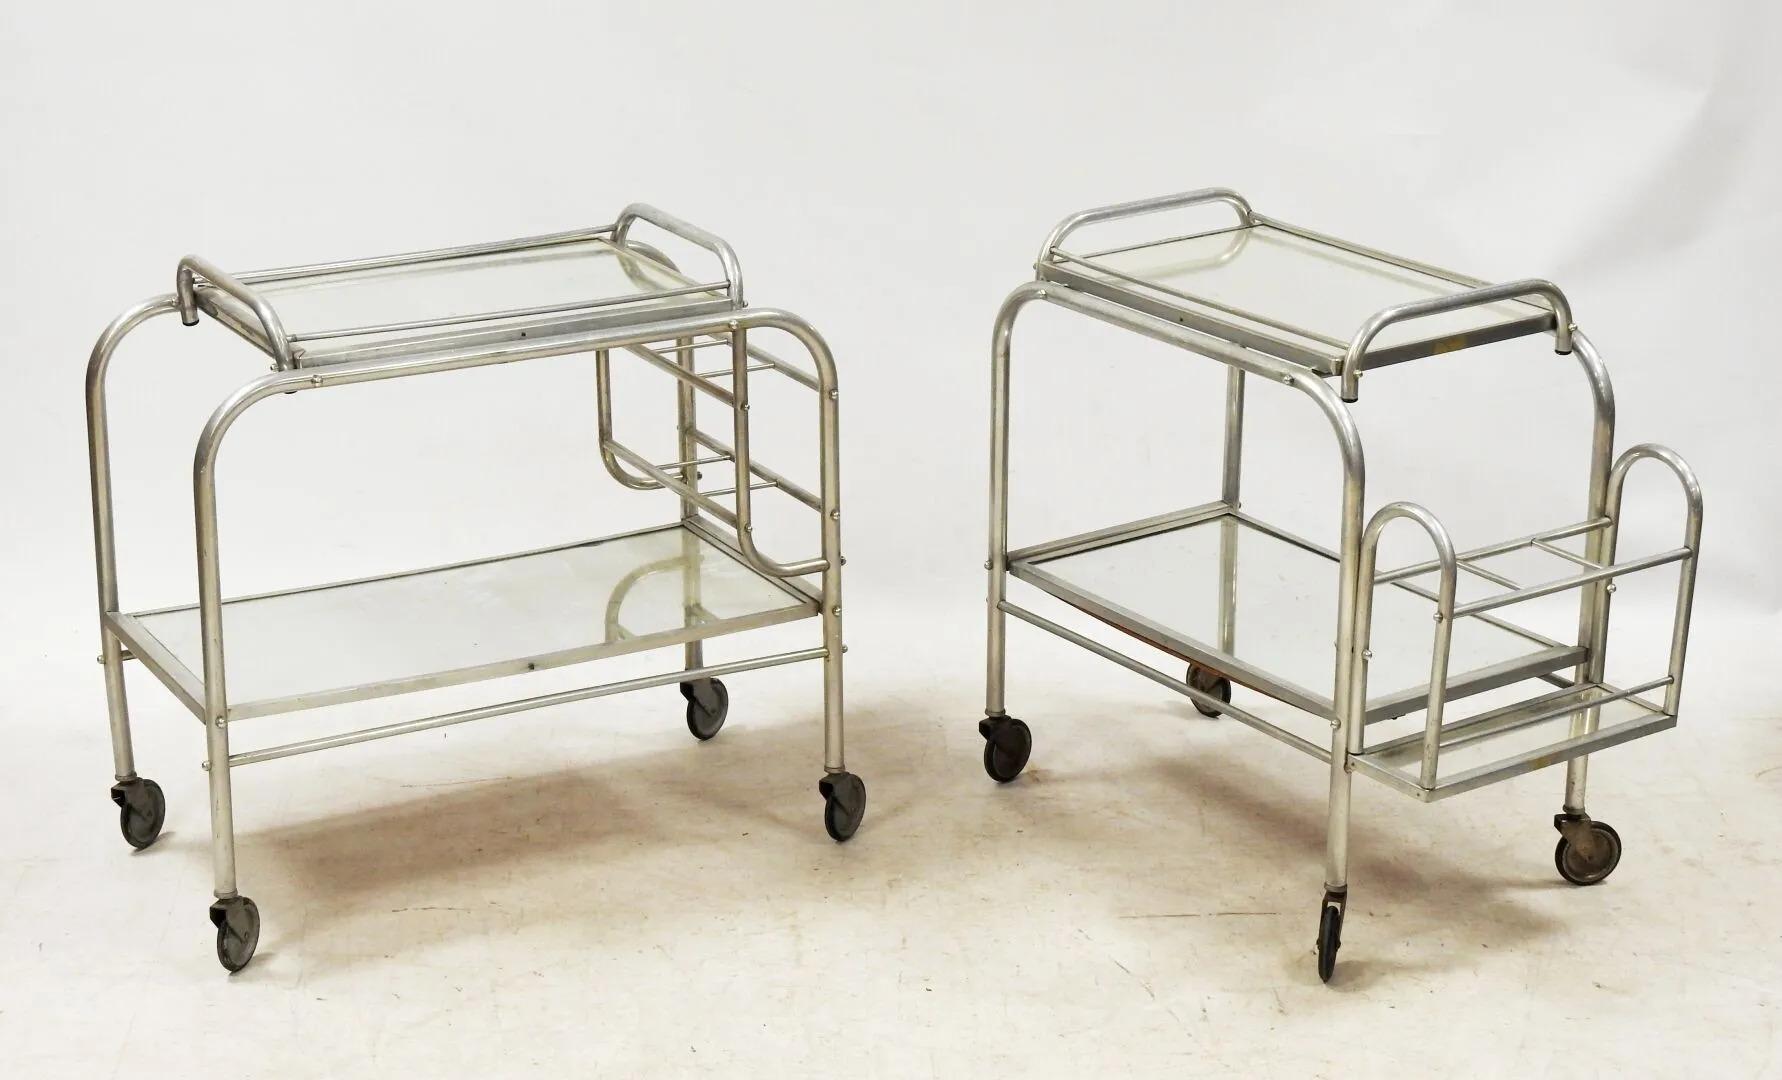 Jacques Adnet 'in the Style of' with 2 Trolleys That Can Make Pair, circa 1930 For Sale 1